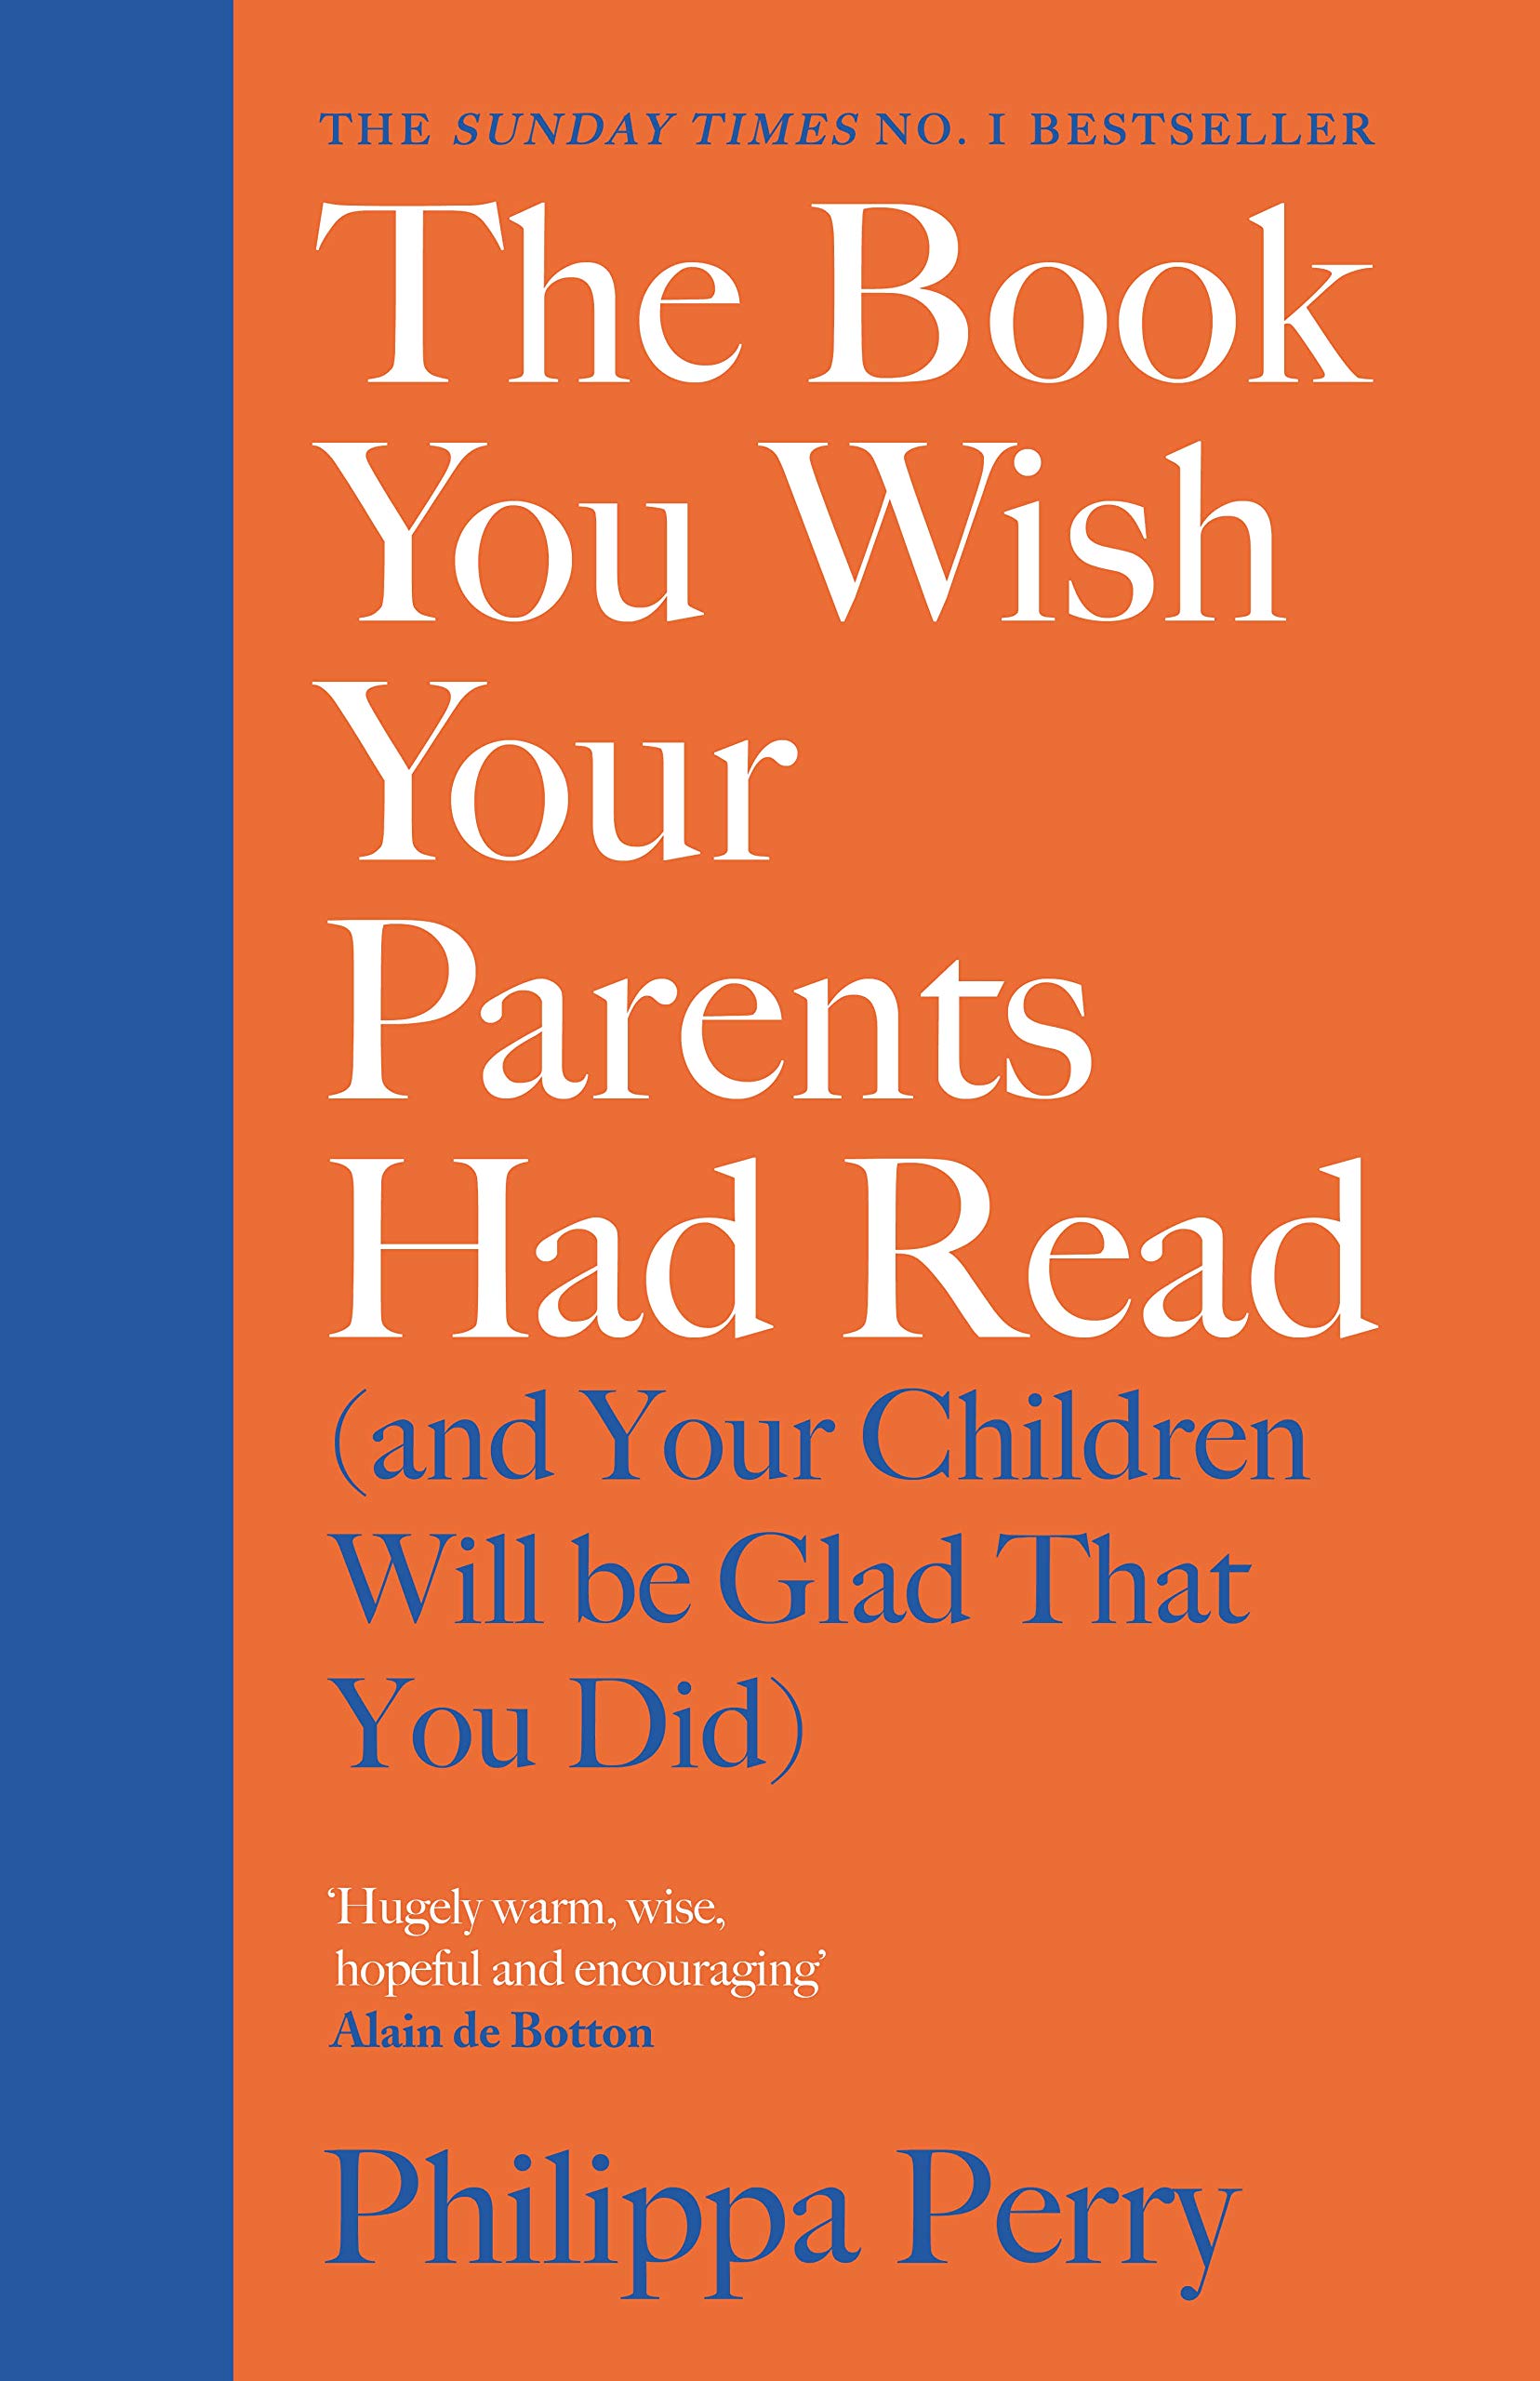 The book you wish your parents had readDa